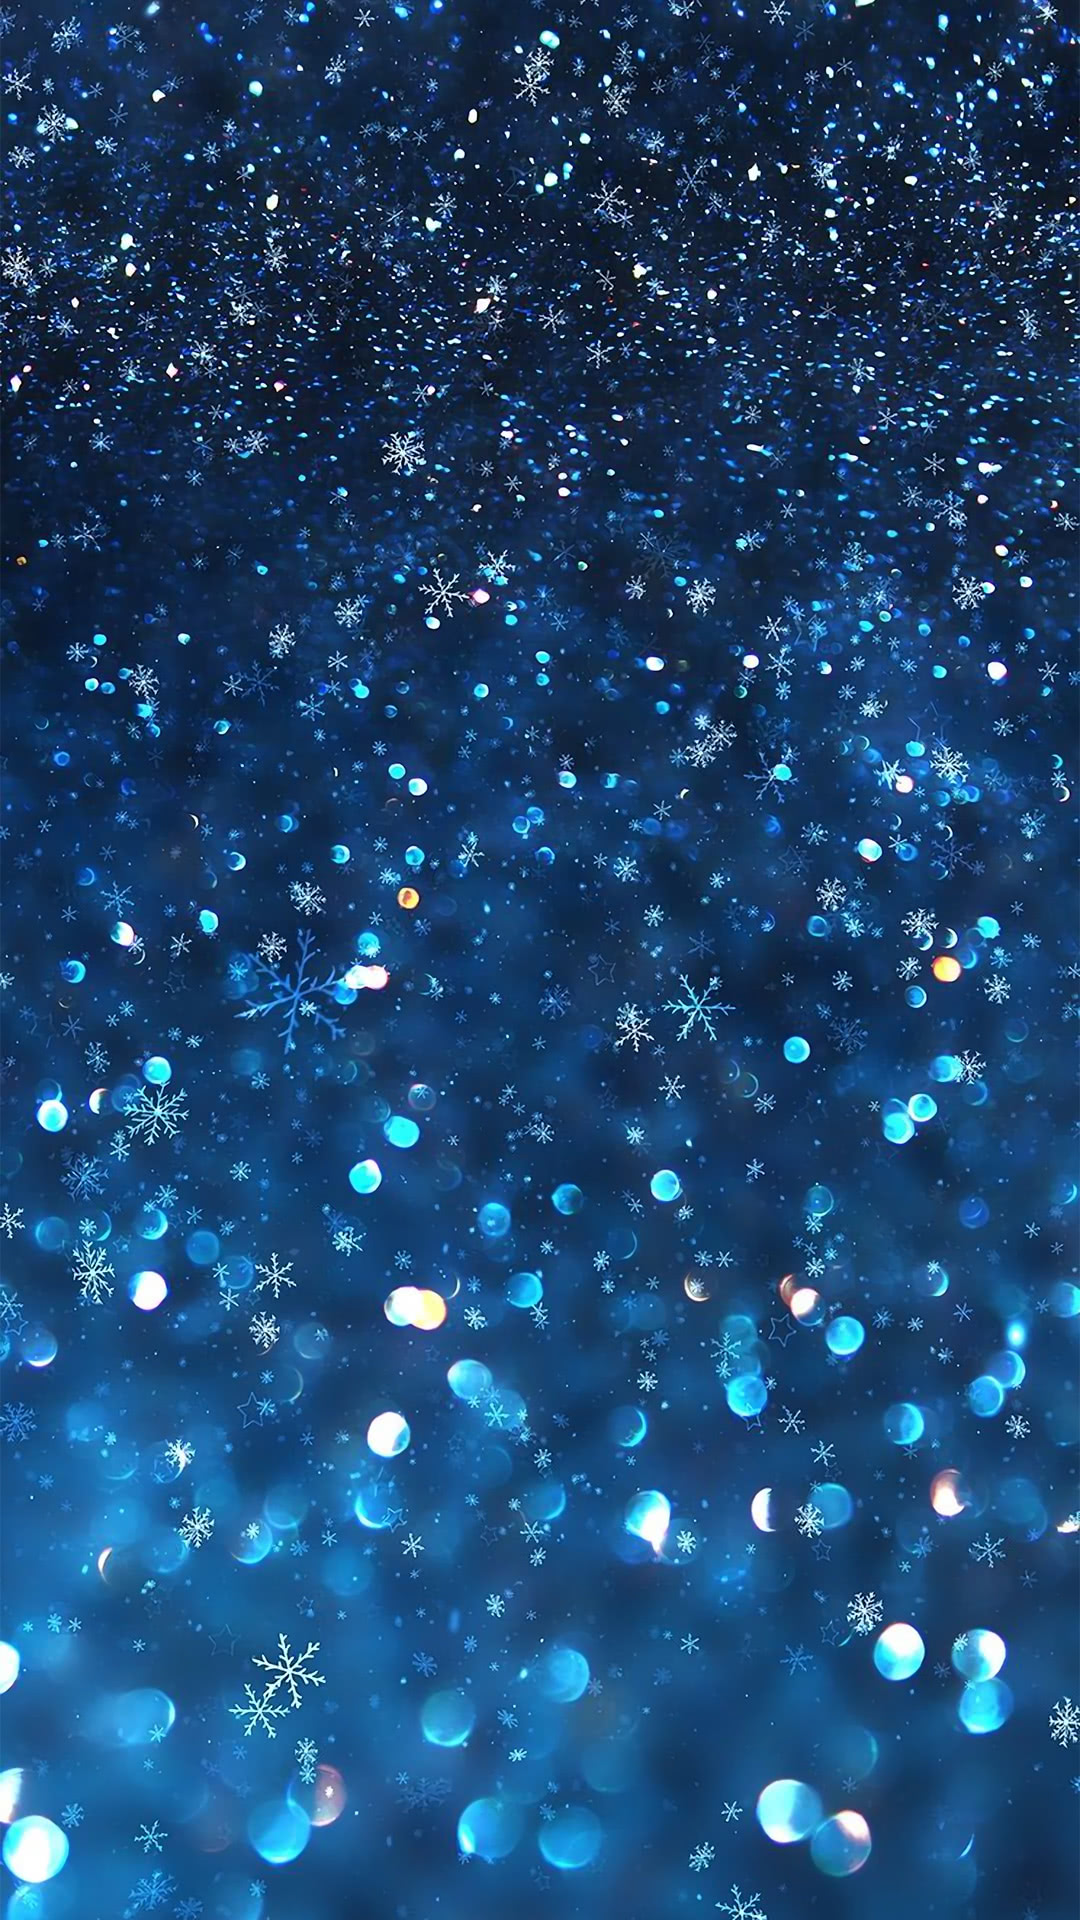 Shining Snow Flakes Iphone Wallpapers